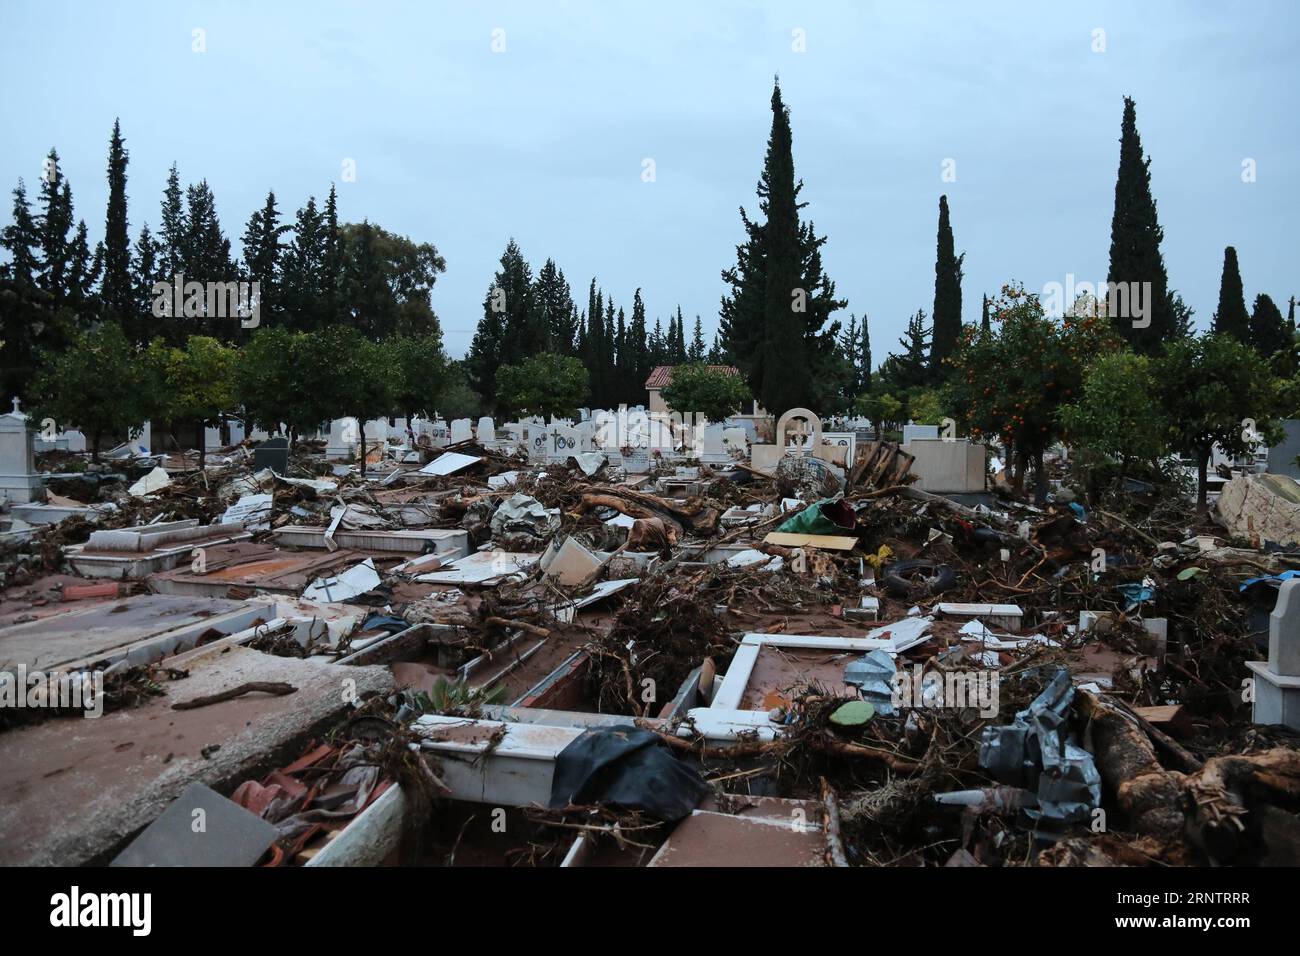 (171117) -- ATHENS, Nov. 17, 2017 -- Photo taken on Nov. 16, 2017 shows a damaged cemetery after the flash flooding in Mandra, Greece. The strong torrential downpour which turned roads into muddy rivers in the municipalities of Mandra, Nea Peramos and Megara, about 20 kilometers west of the Greek capital, has claimed 16 lives, according to the latest official count. )(swt) GREECE-ATHENS-FLOODING LefterisxPartsalis PUBLICATIONxNOTxINxCHN Stock Photo